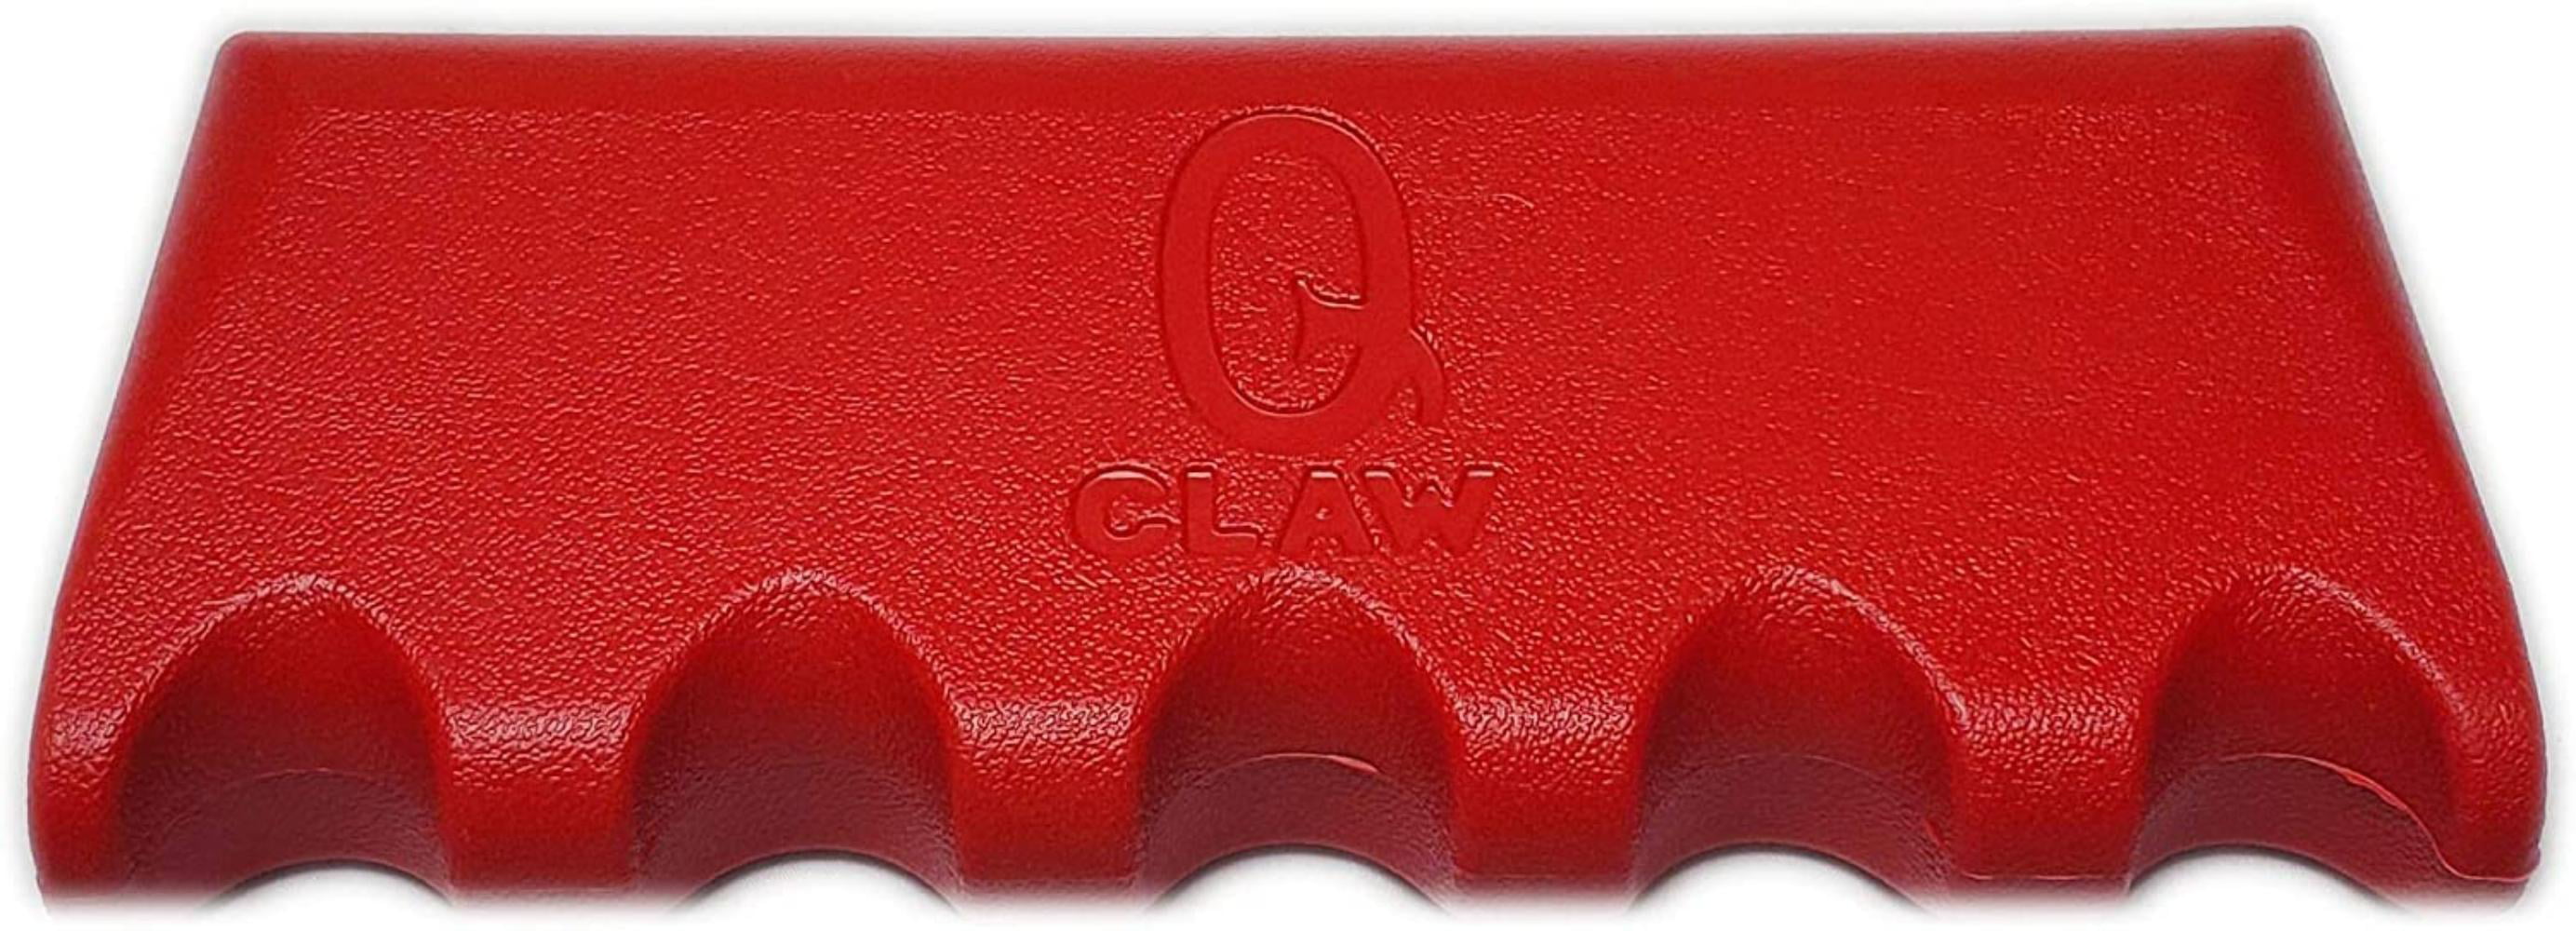 1 Place Yellow Q-Claw QCLAW Portable Pool/Billiards Cue Stick Holder/Rack 